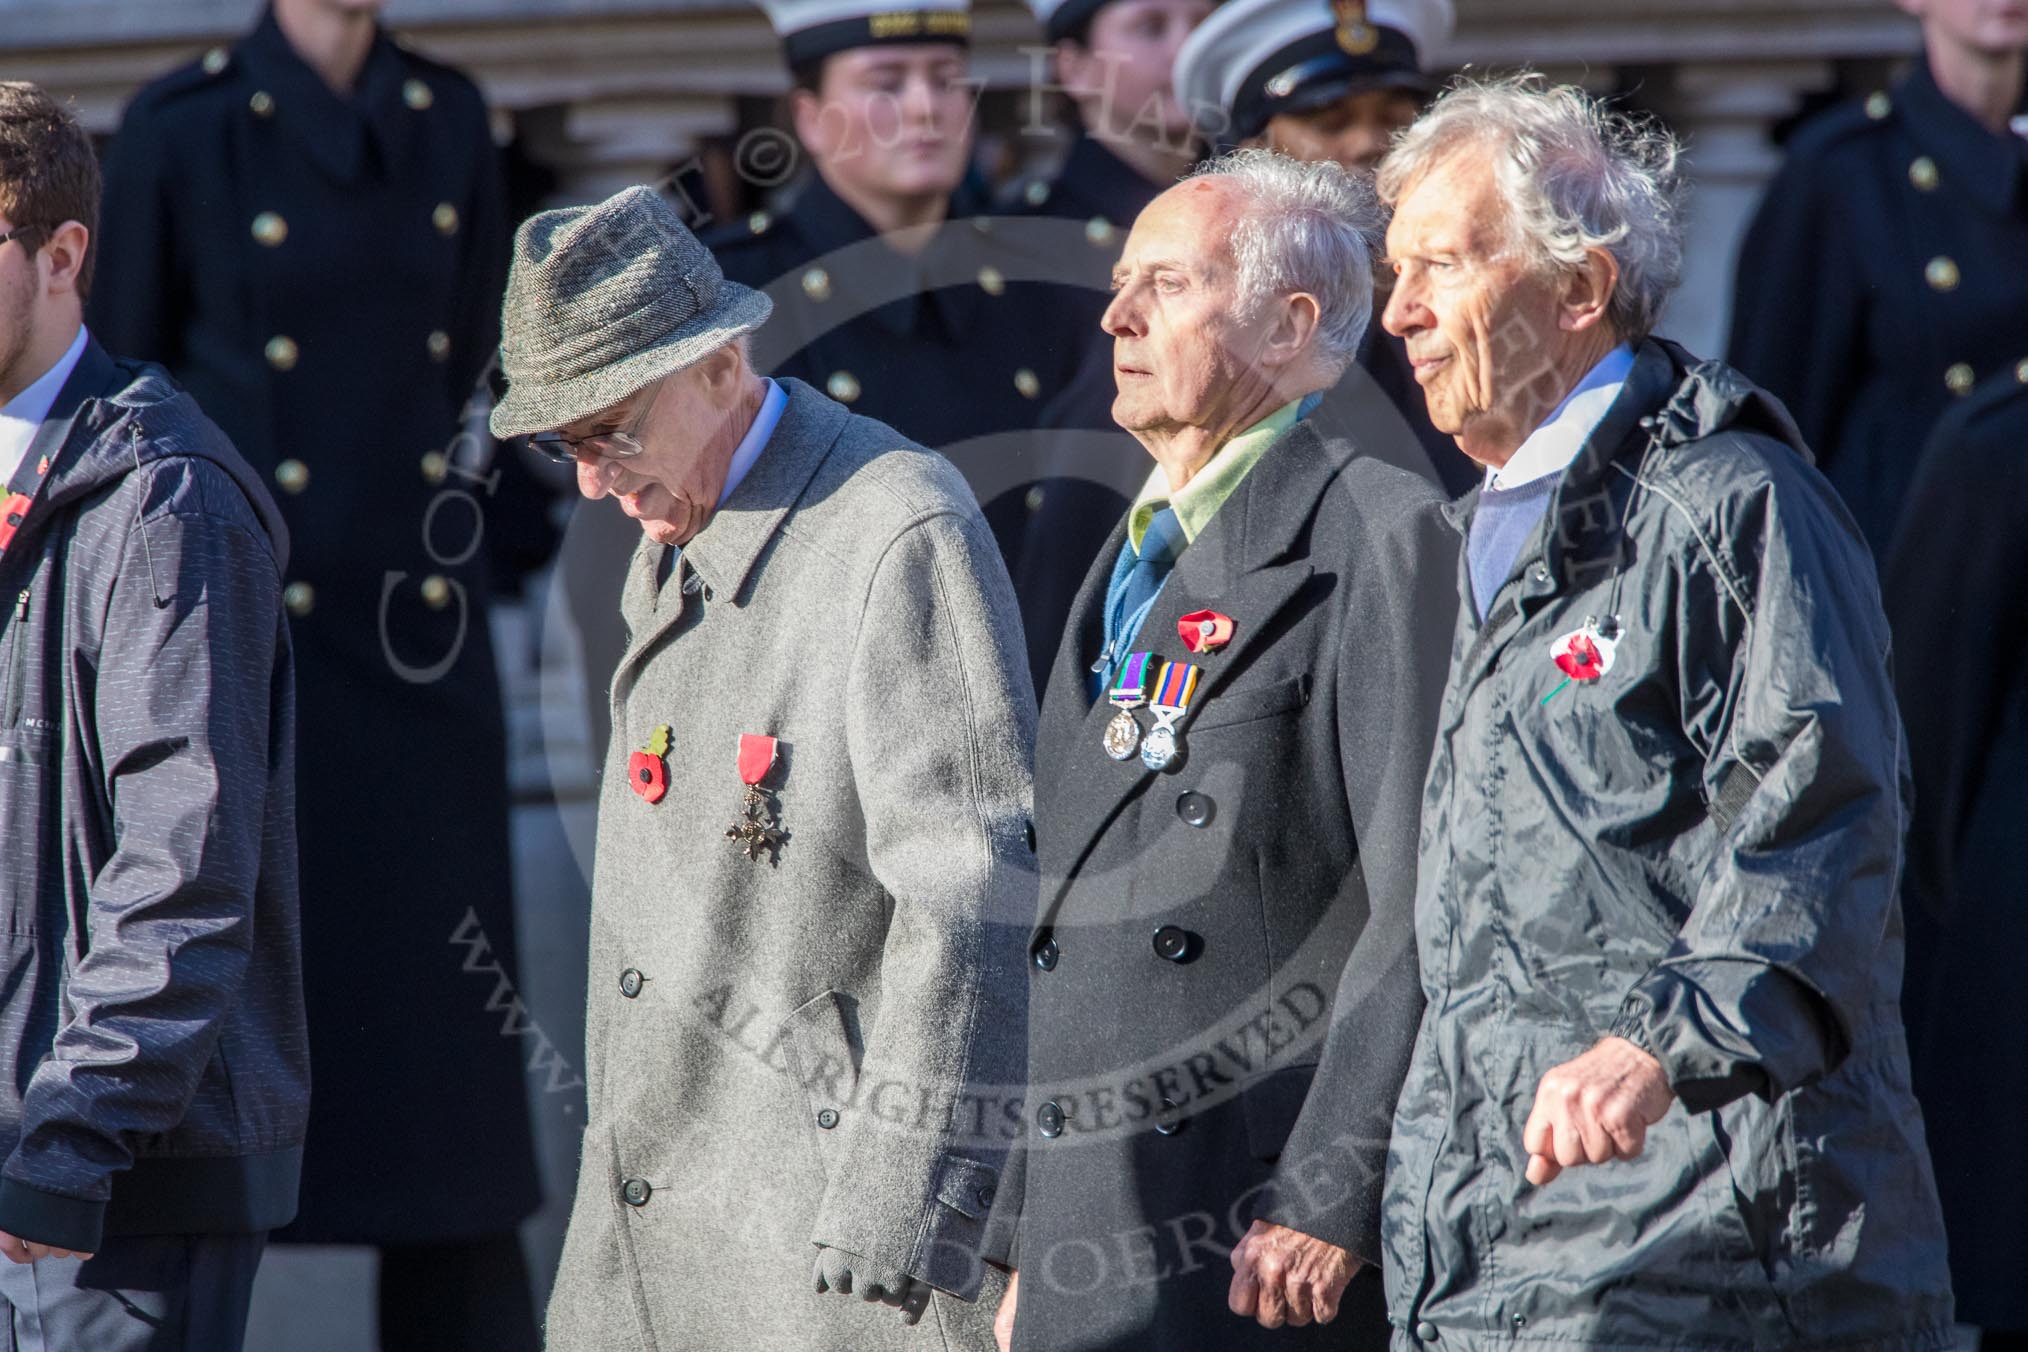 RAF Airfield Squadron Branch Association s (Group C14, 12 members) during the Royal British Legion March Past on Remembrance Sunday at the Cenotaph, Whitehall, Westminster, London, 11 November 2018, 12:16.